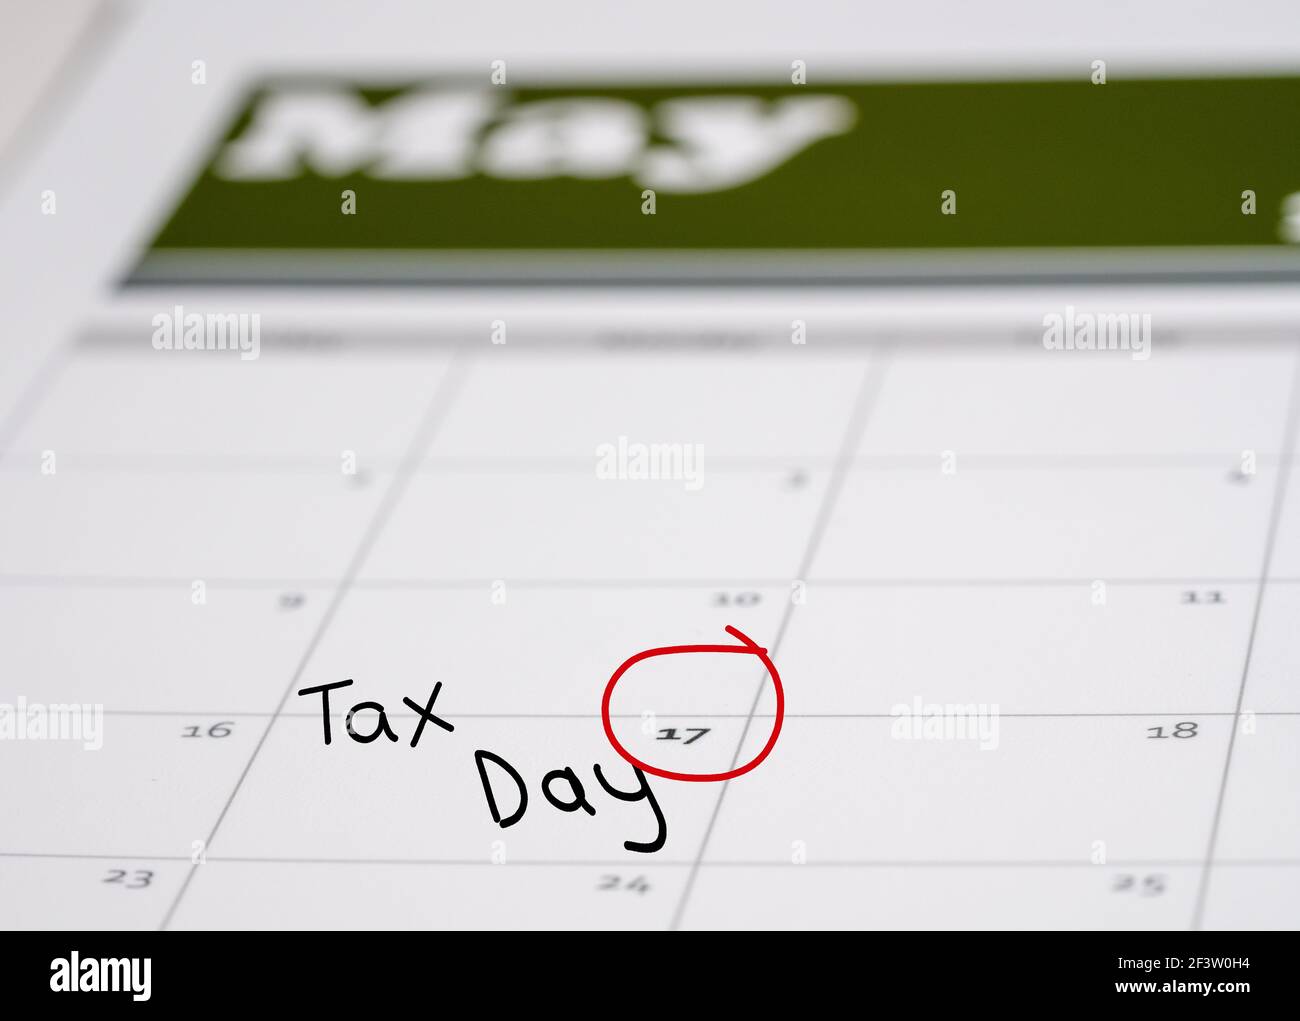 Calendar with Tax Day note inserted in the date for May 17 to illustrate the new tax return filing date of f17th May 2021. Stock Photo